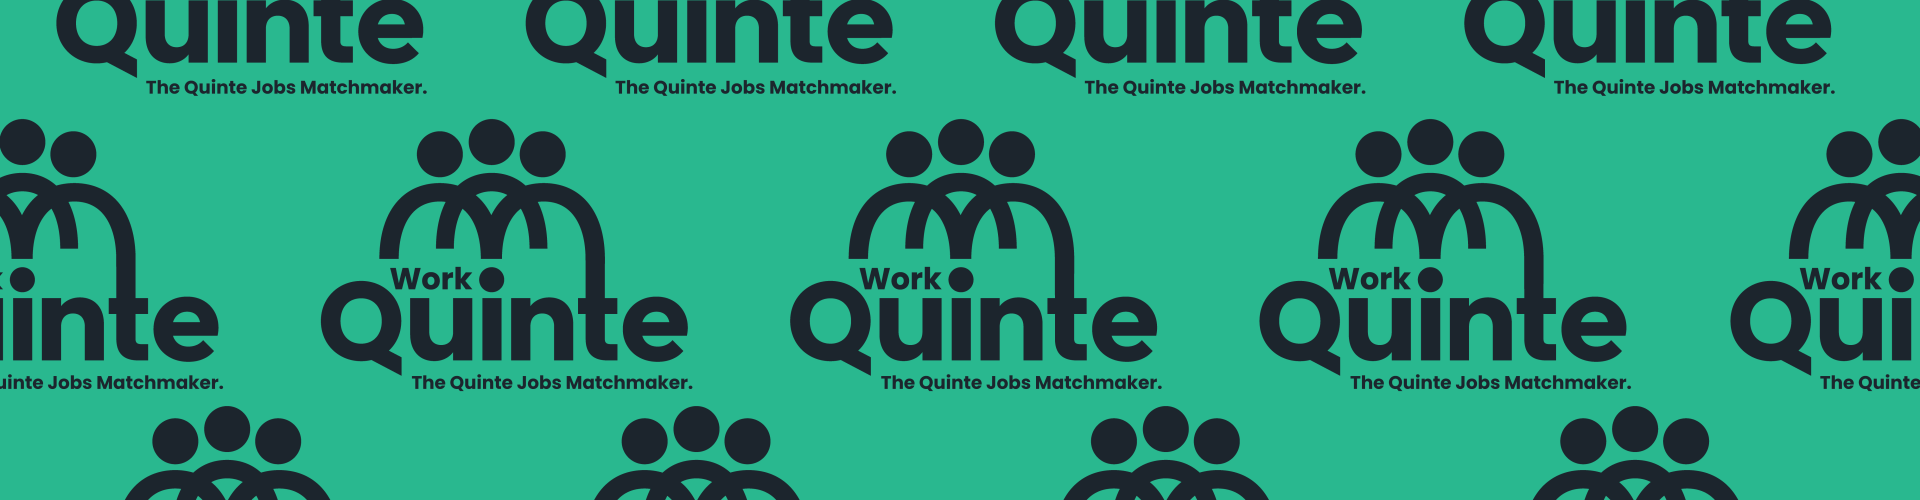 Teal background with black Work in Quinte logo and The Quinte Jobs Matchmaker tagline.